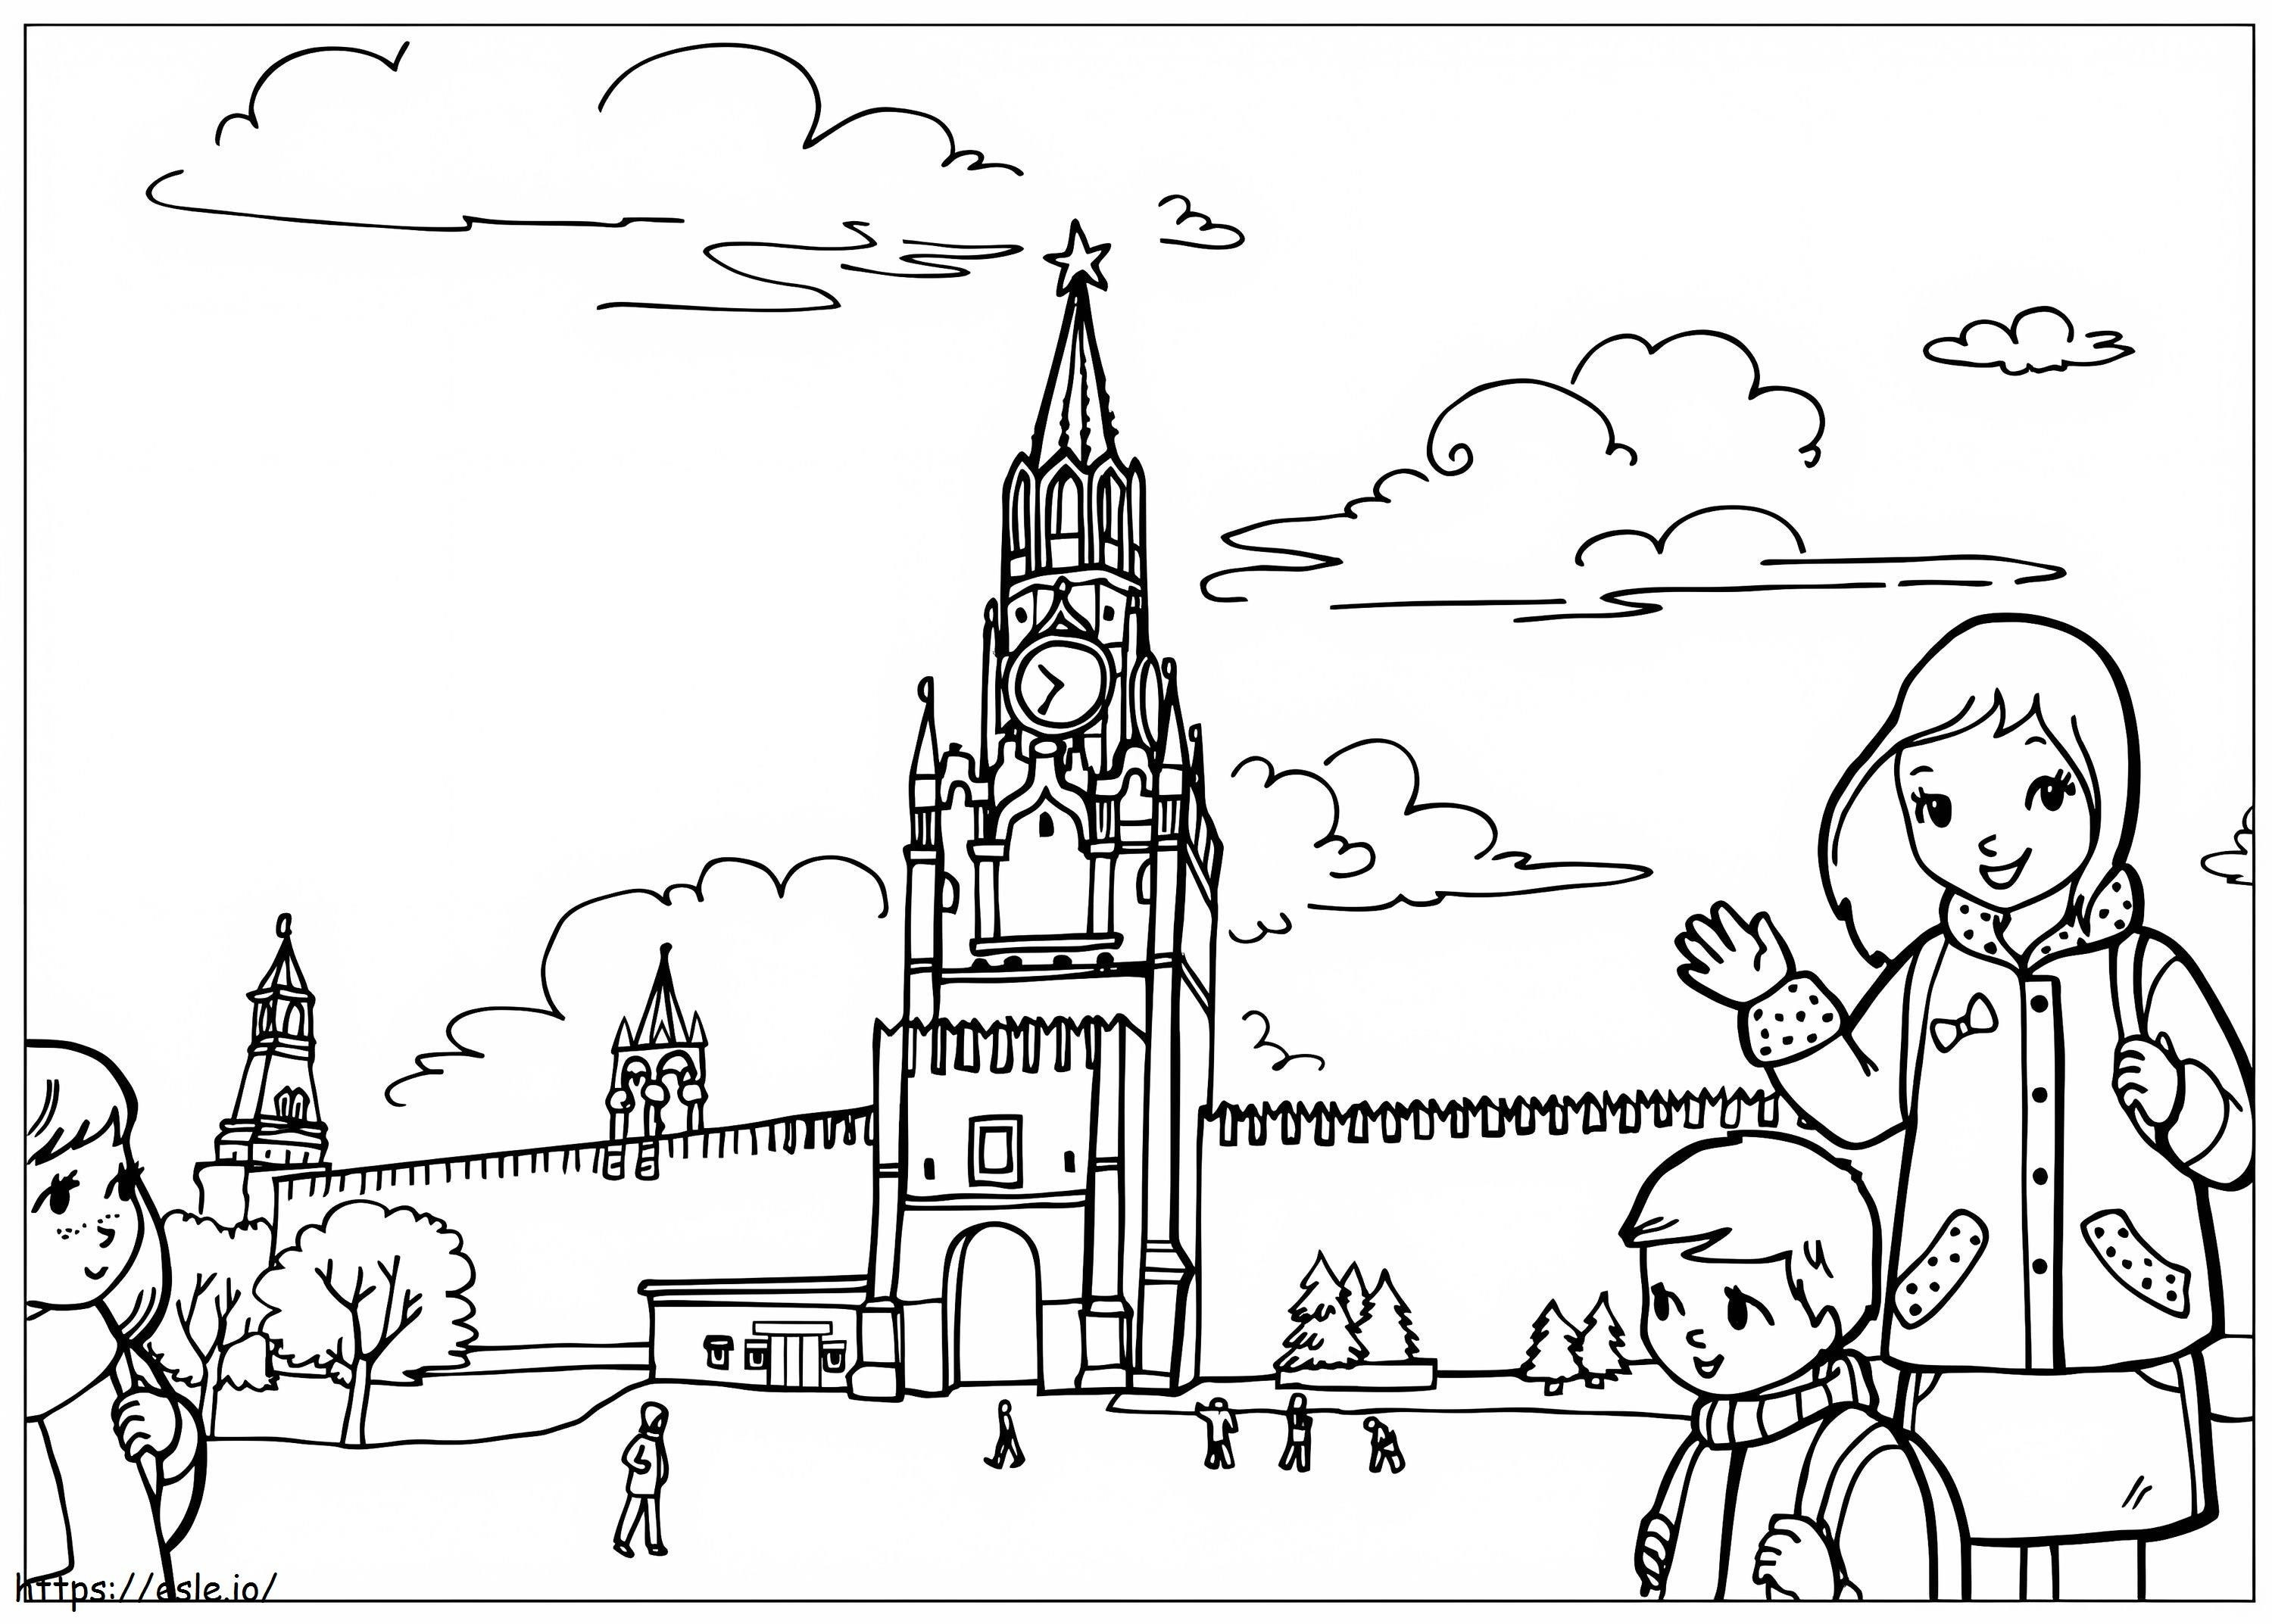 The Moscow Kremlin coloring page